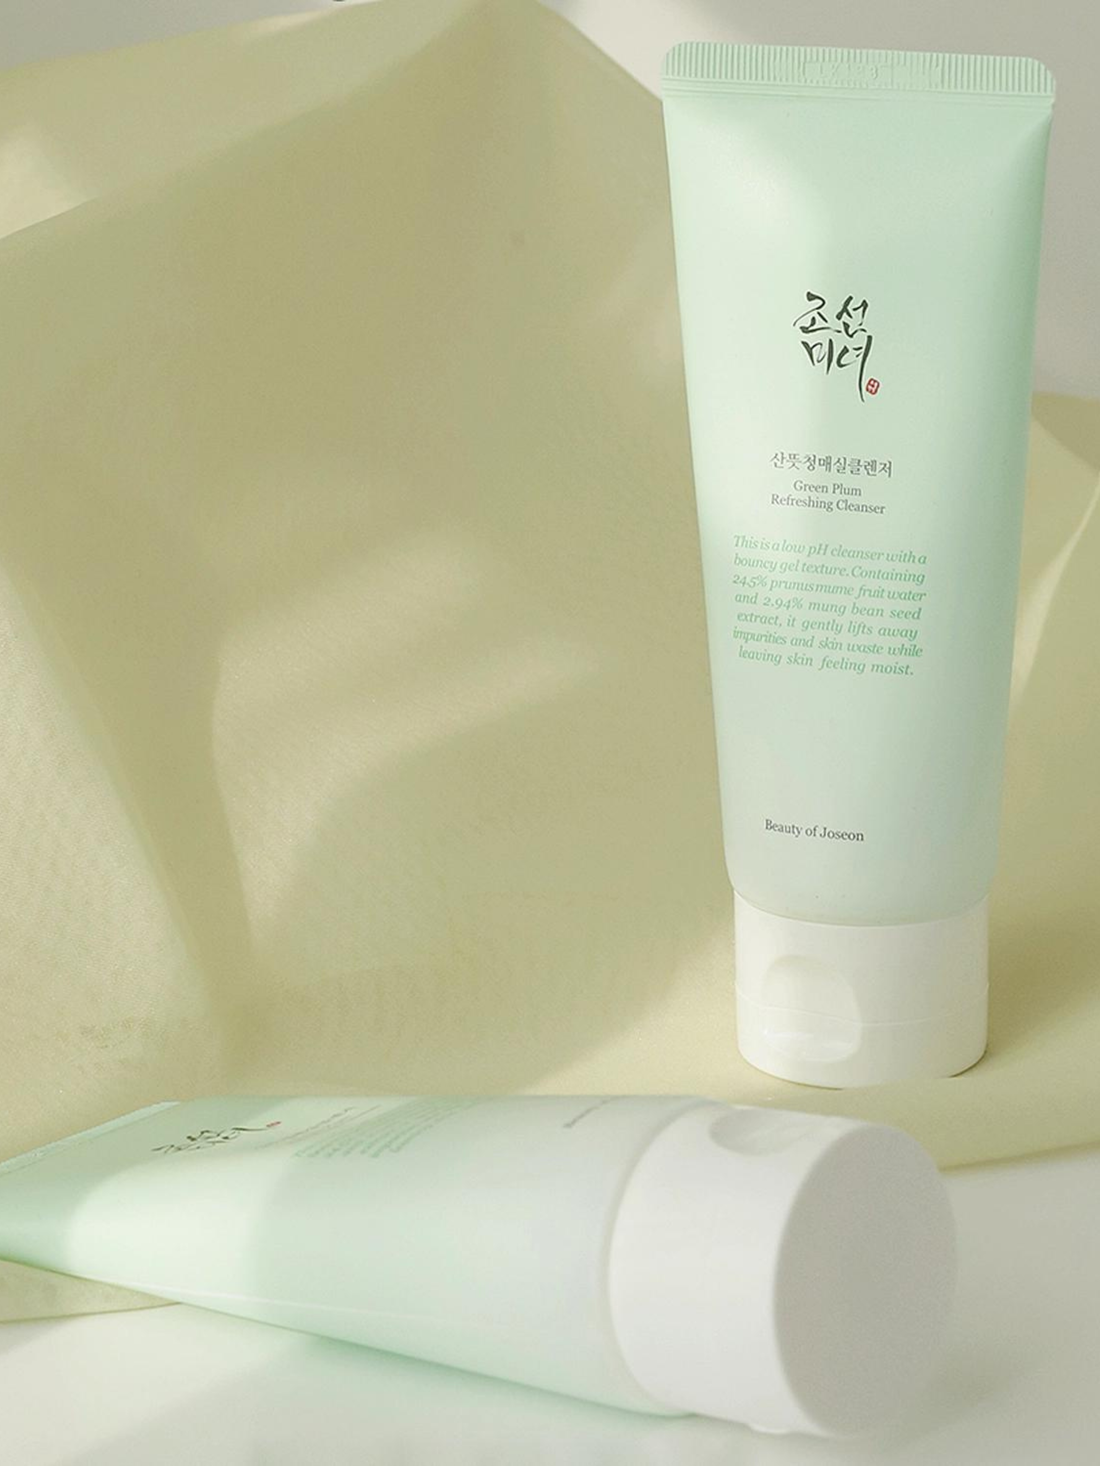 Beauty of Joseon - Cleanser - Green plum Refreshing Cleanser